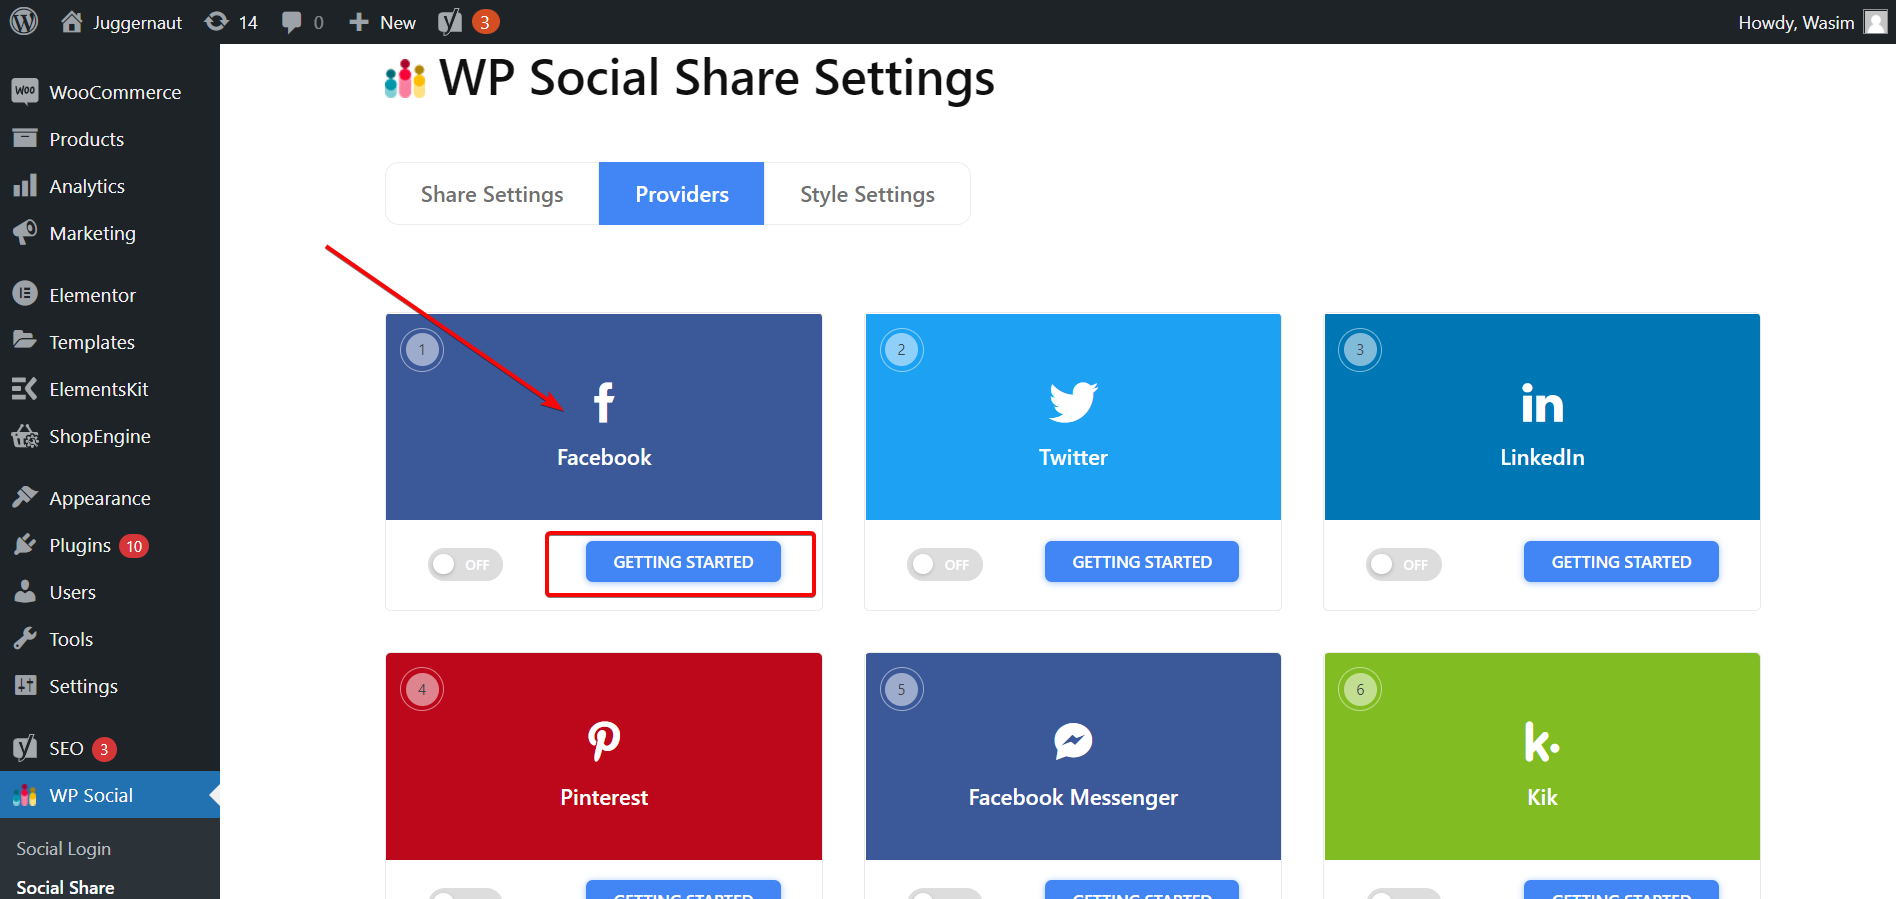 Switch to the Providers tab and start with Facebook